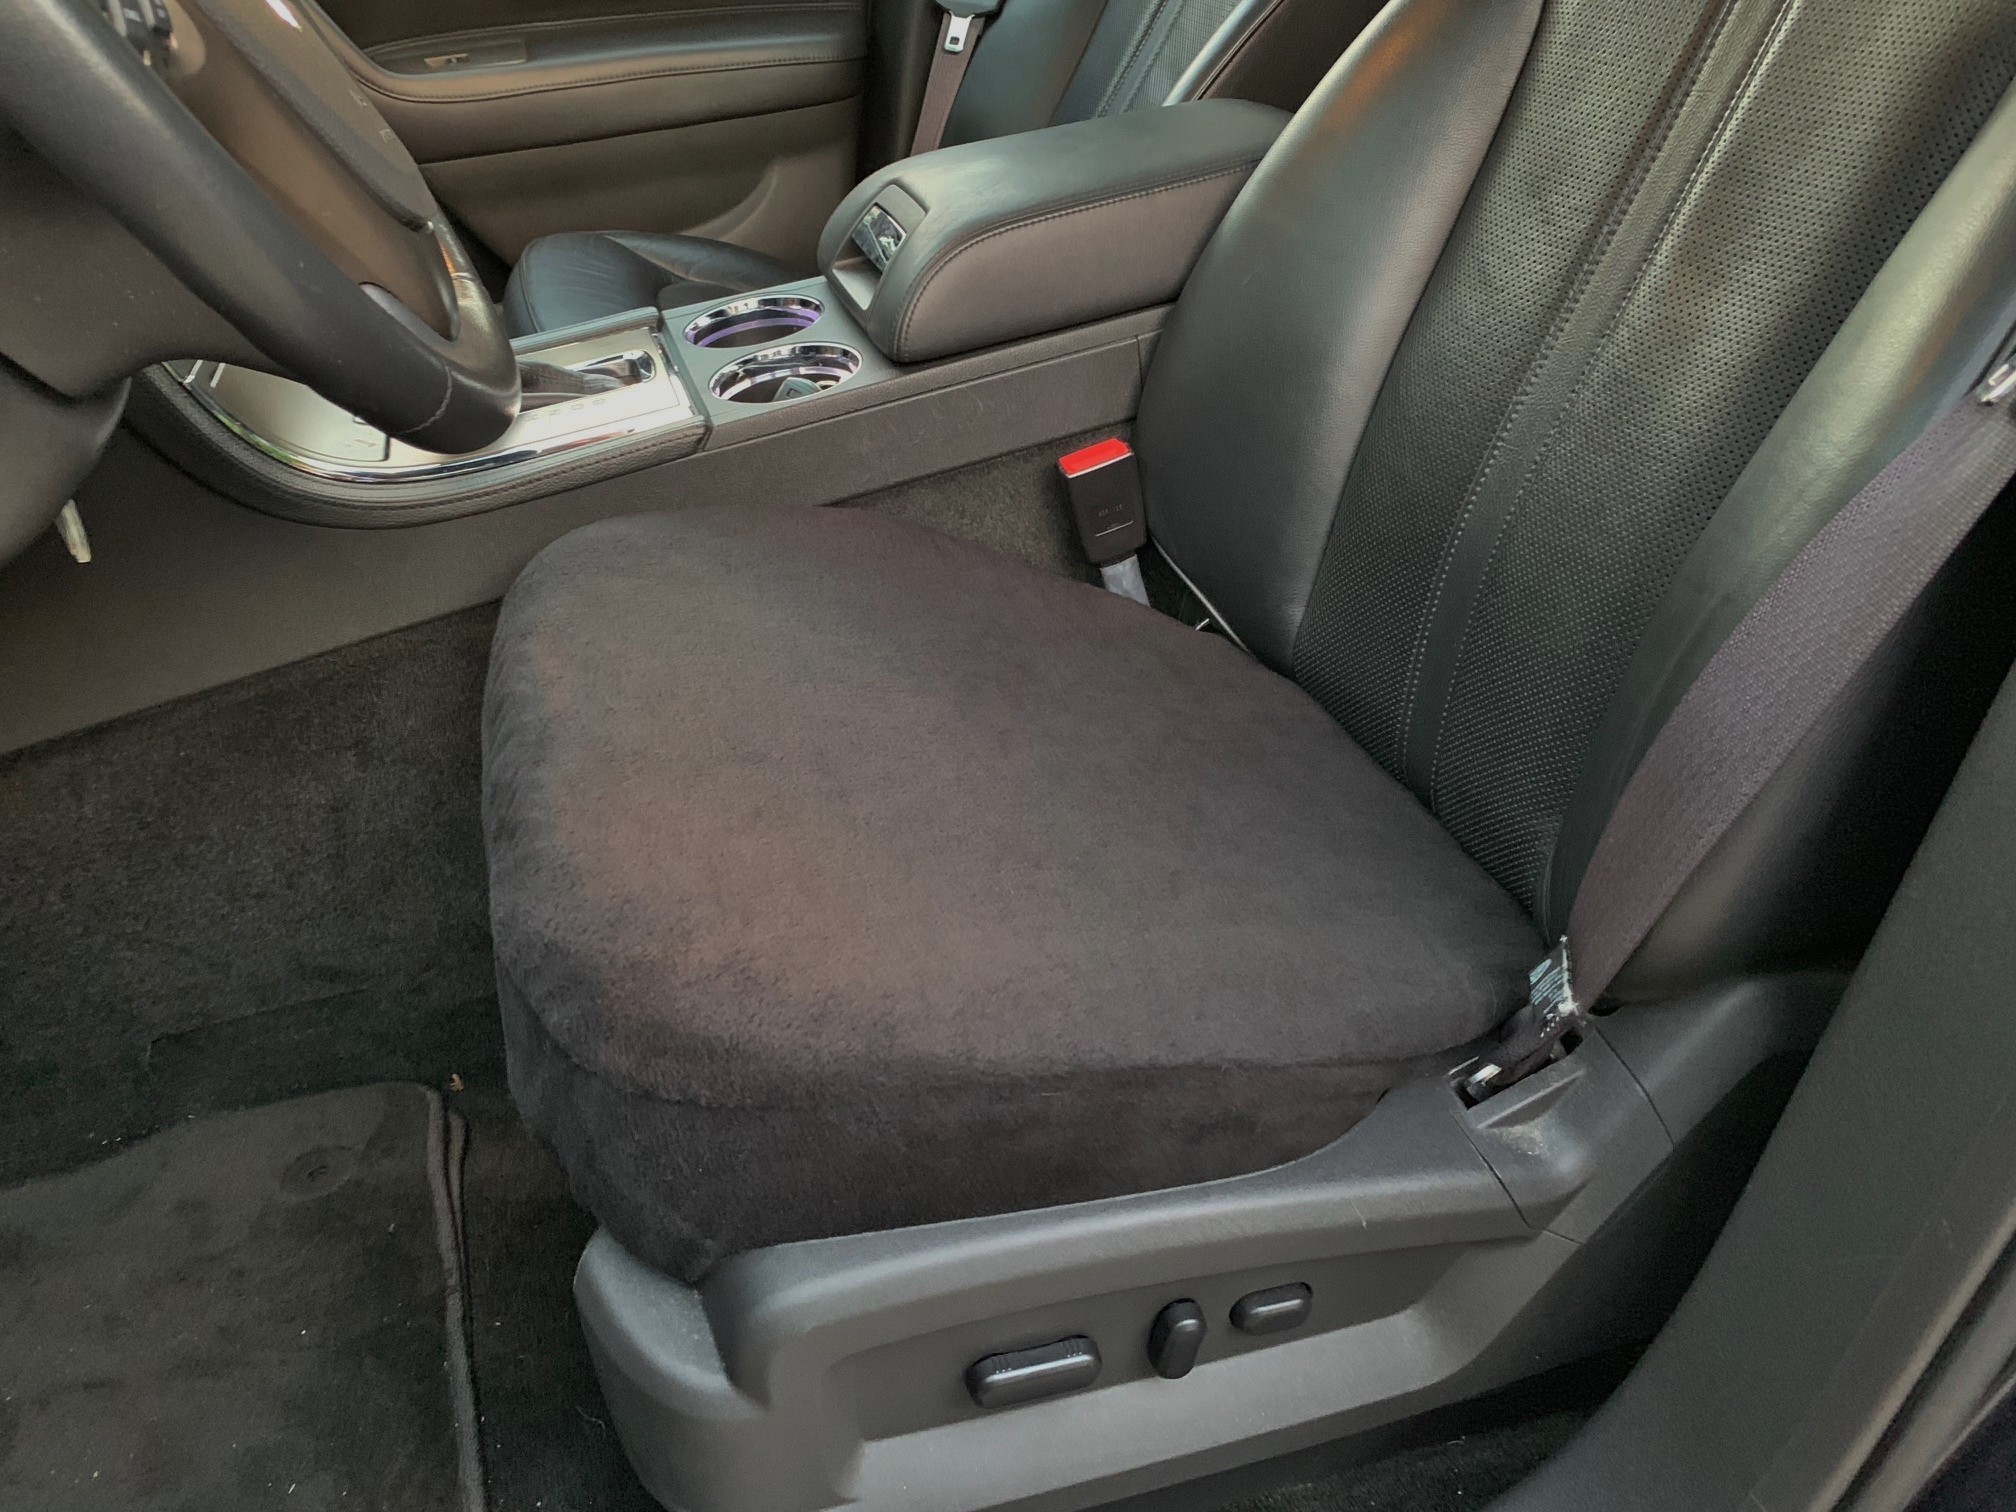 Buy Fleece Bottom Seat Cover for the Toyota Venza 2009-2015 (PAIR)